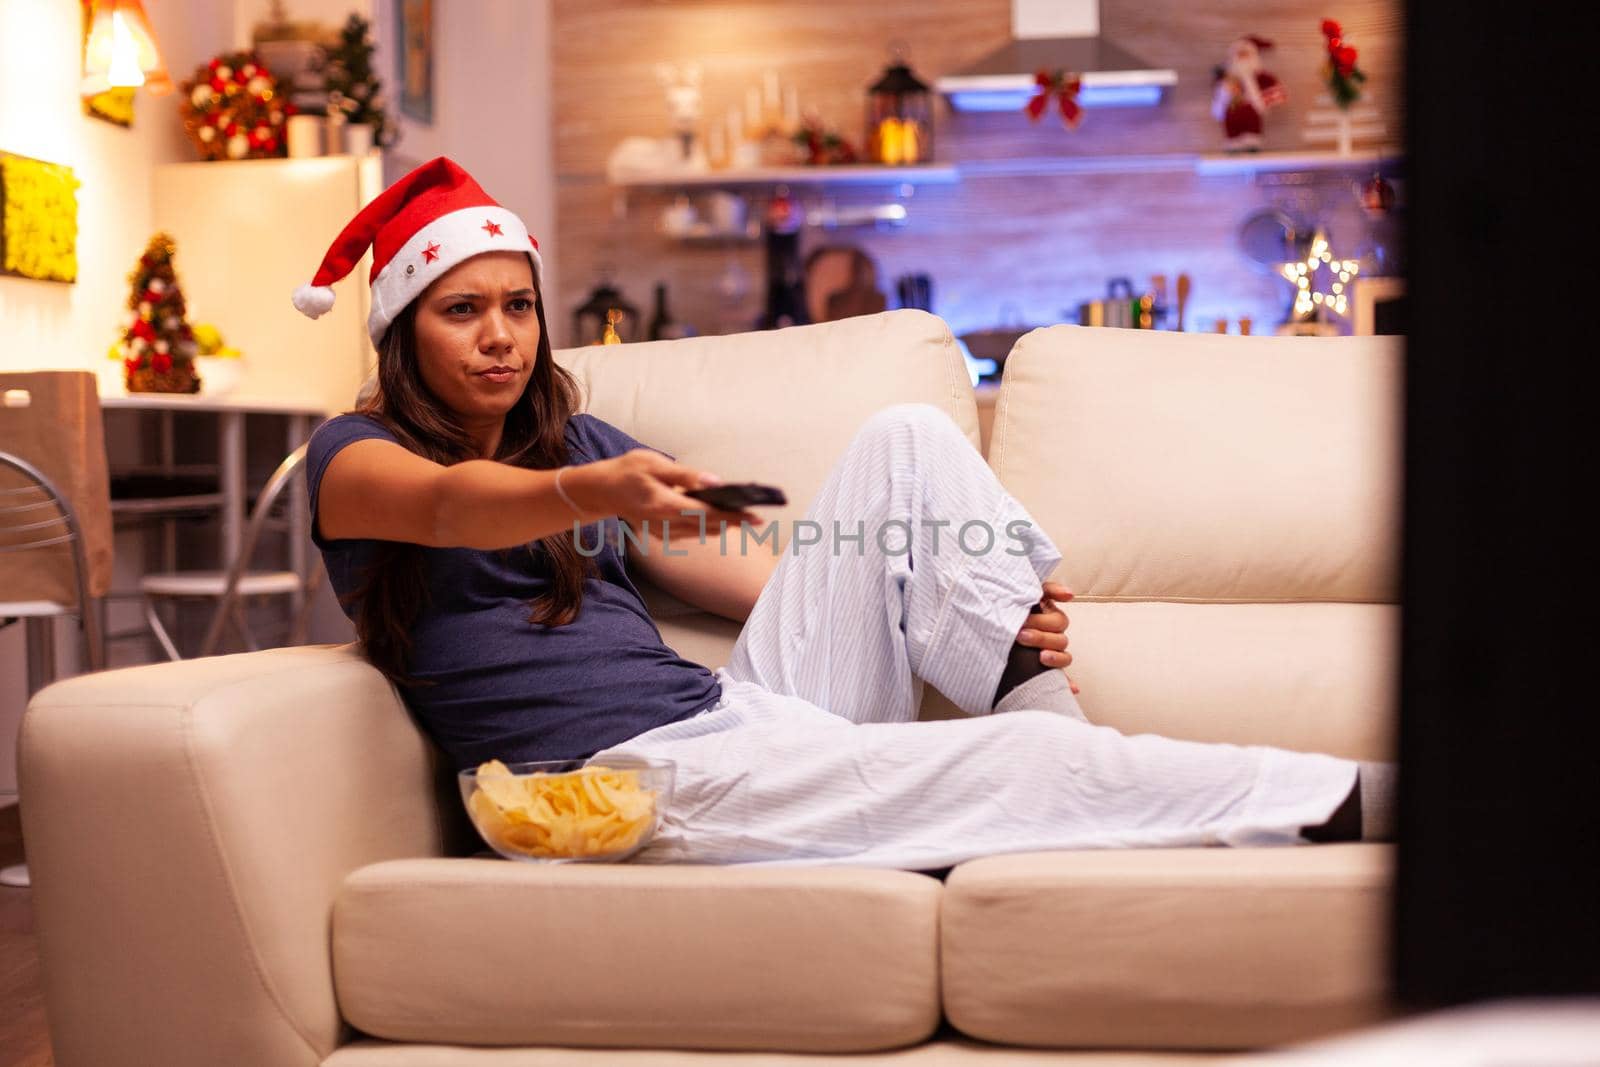 Caucasian female resting on couch watching entertainment movie series on television using remote control enjoying winter season in xmas decorated kitchen. Woman celebrating christmas holiday